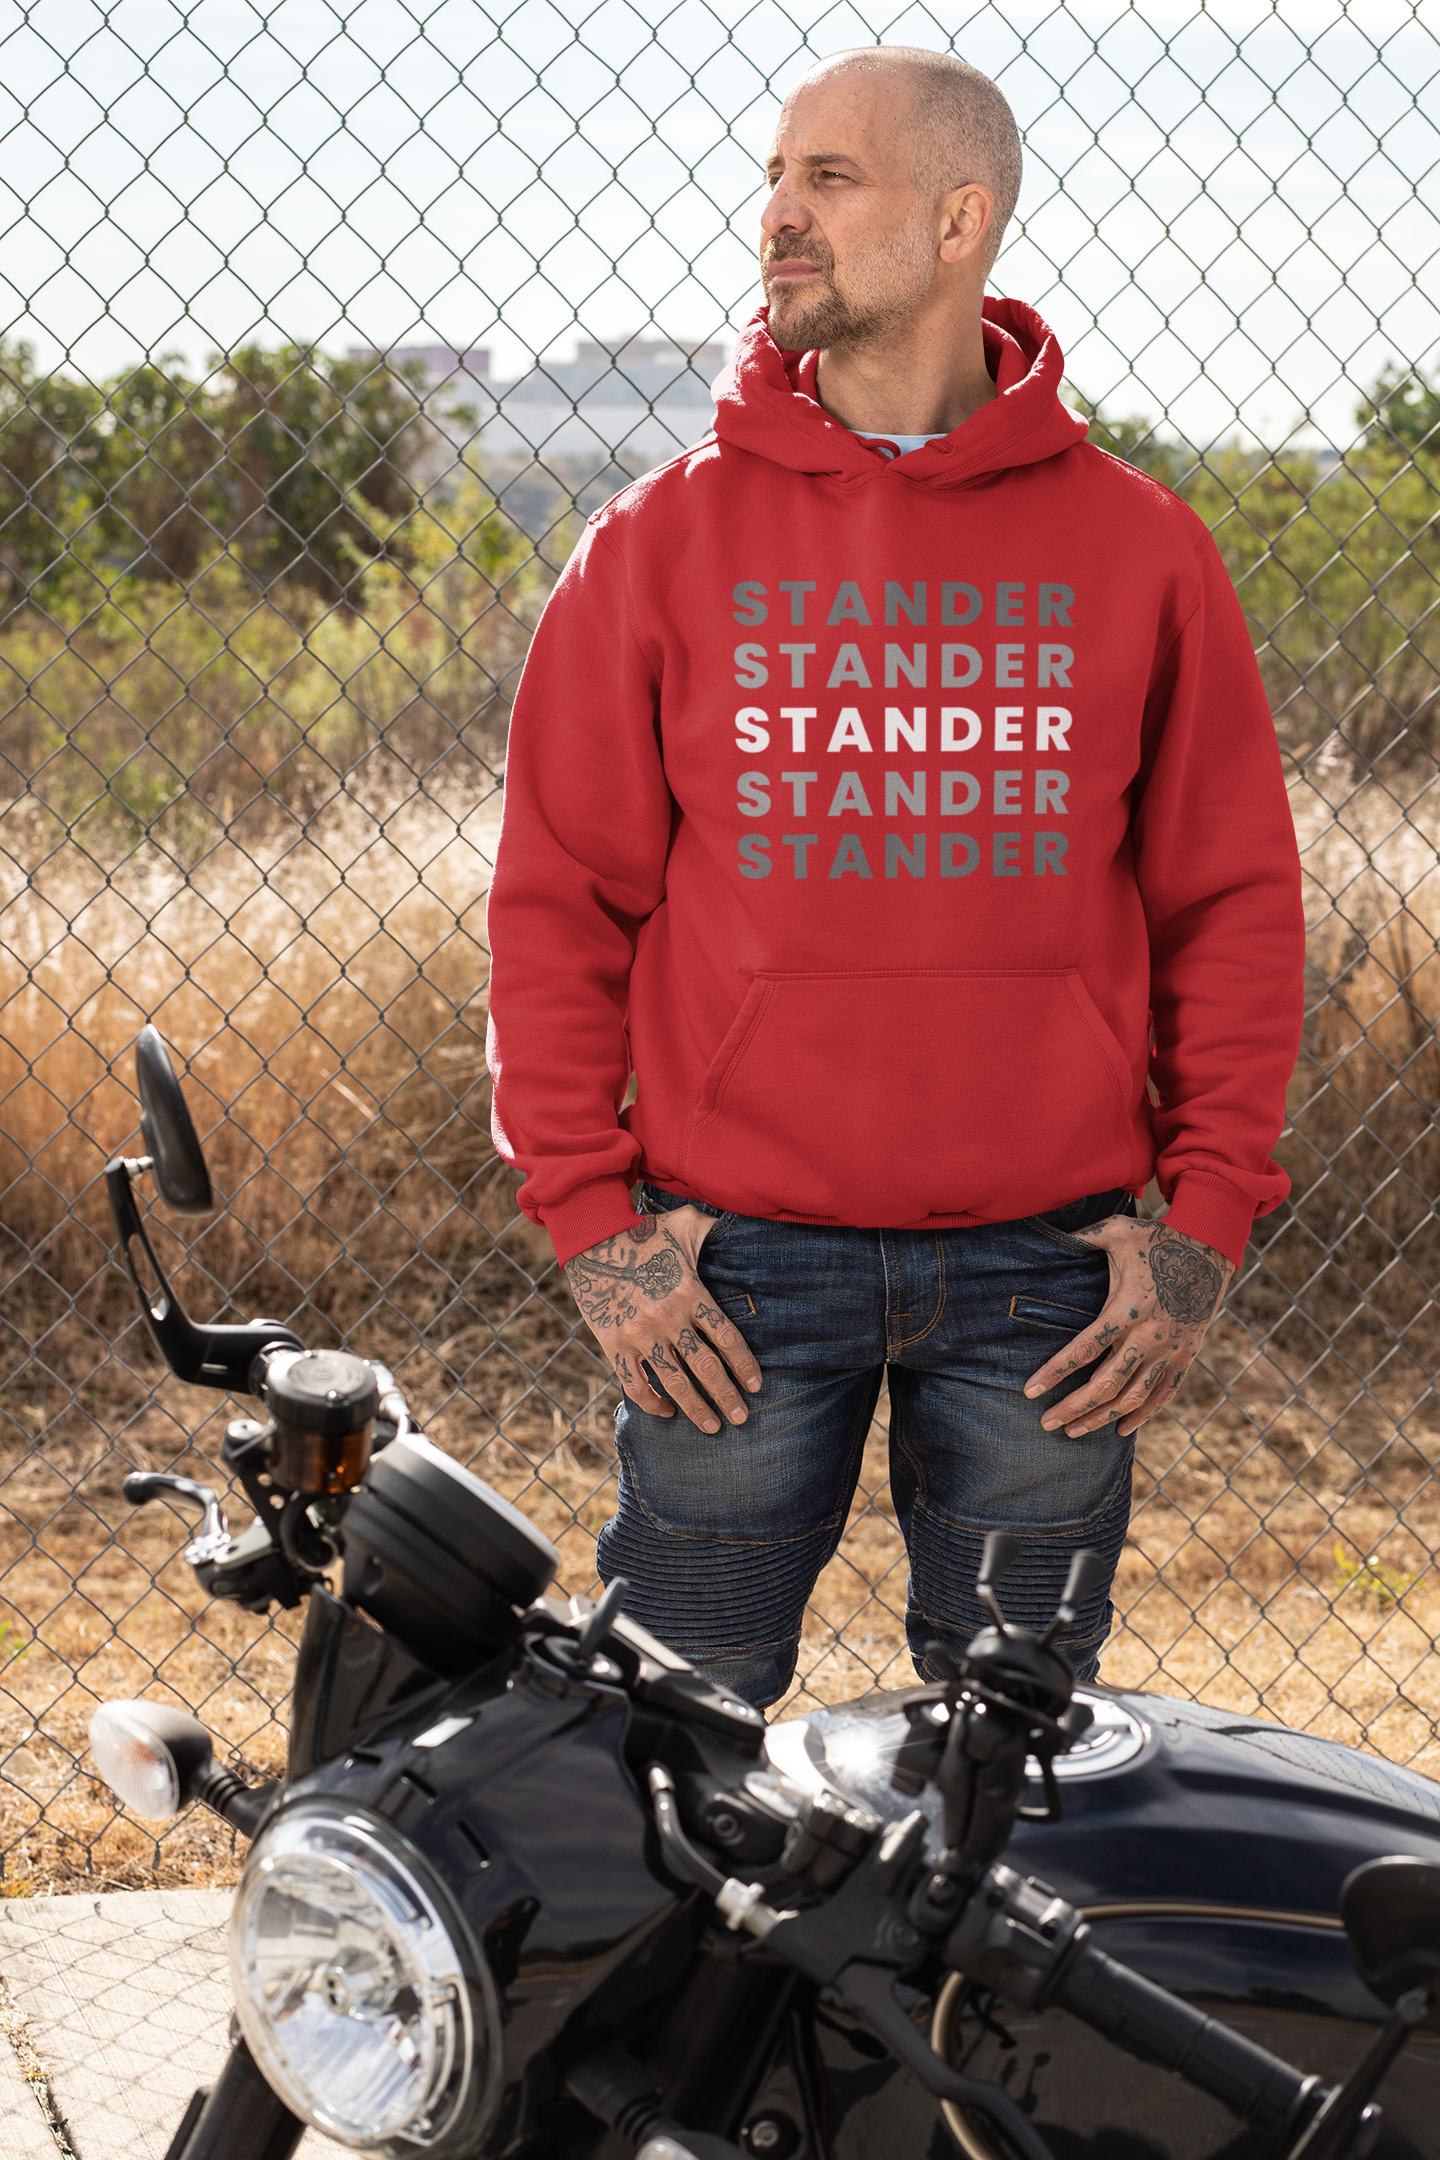 "Stander" - Hooded Sweatshirt t (Light Blue, Black, & Red Available)